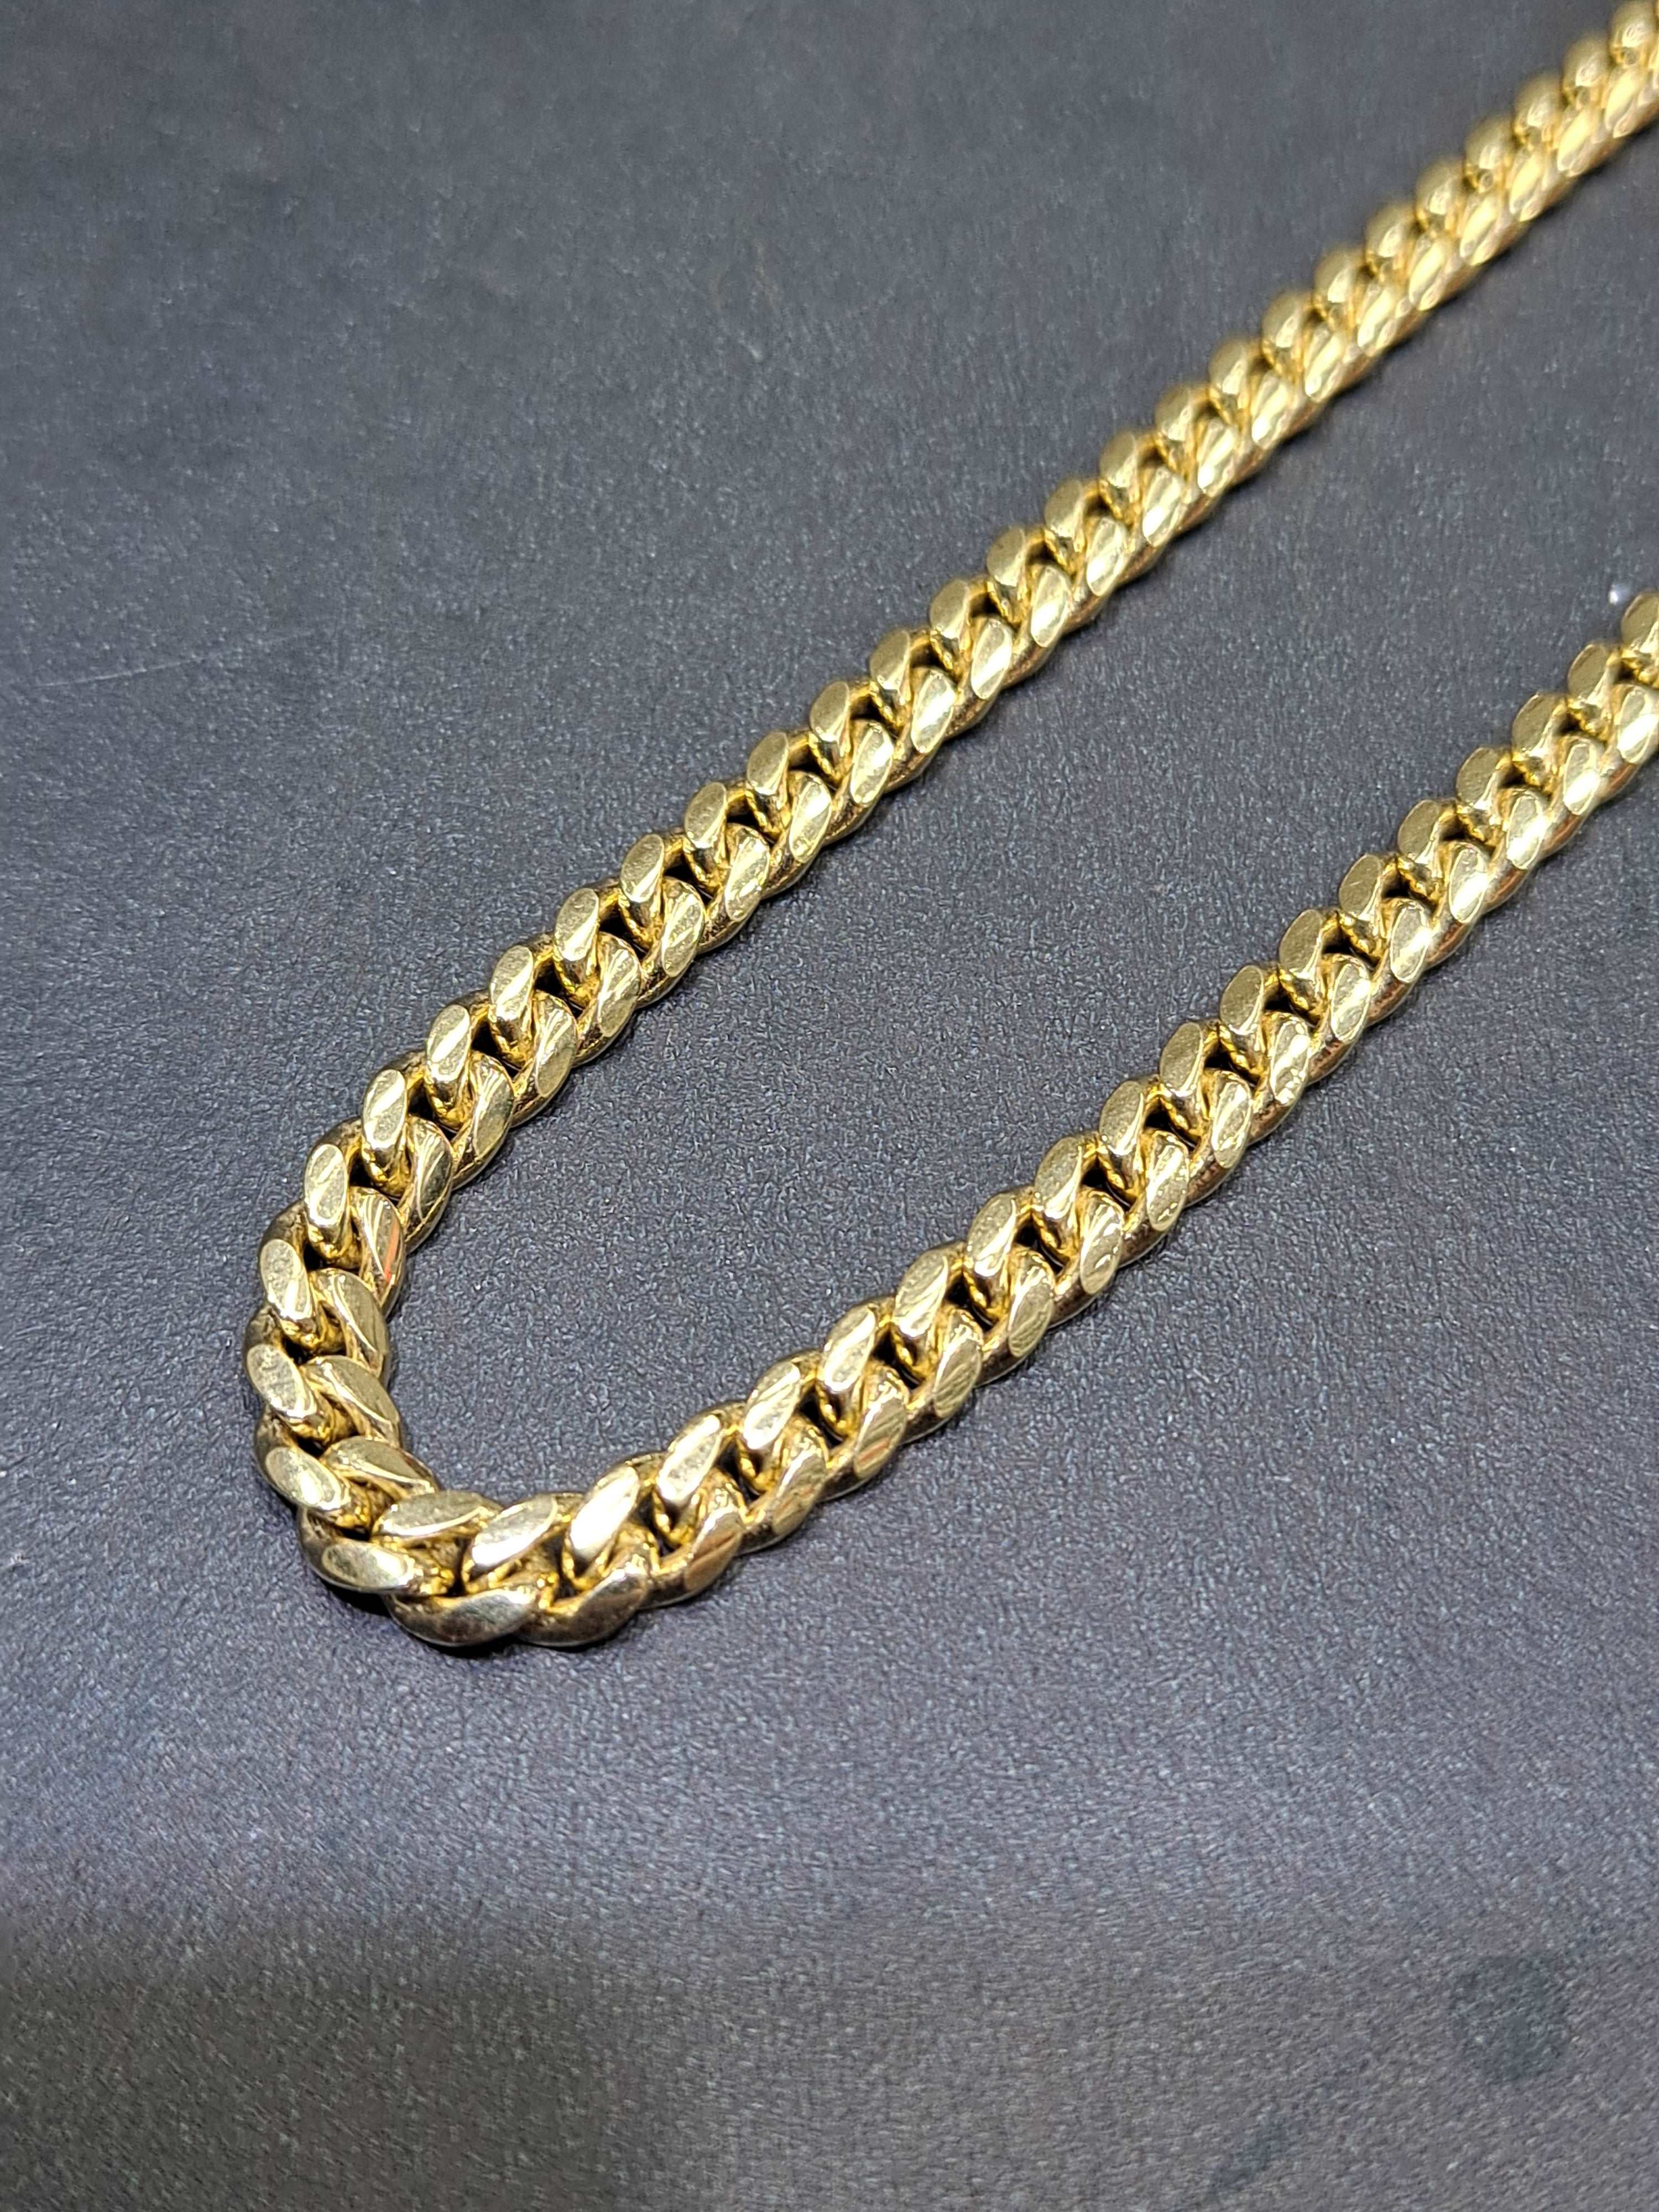 10k new solid miami cuban link 4mm,30 grams,26inches